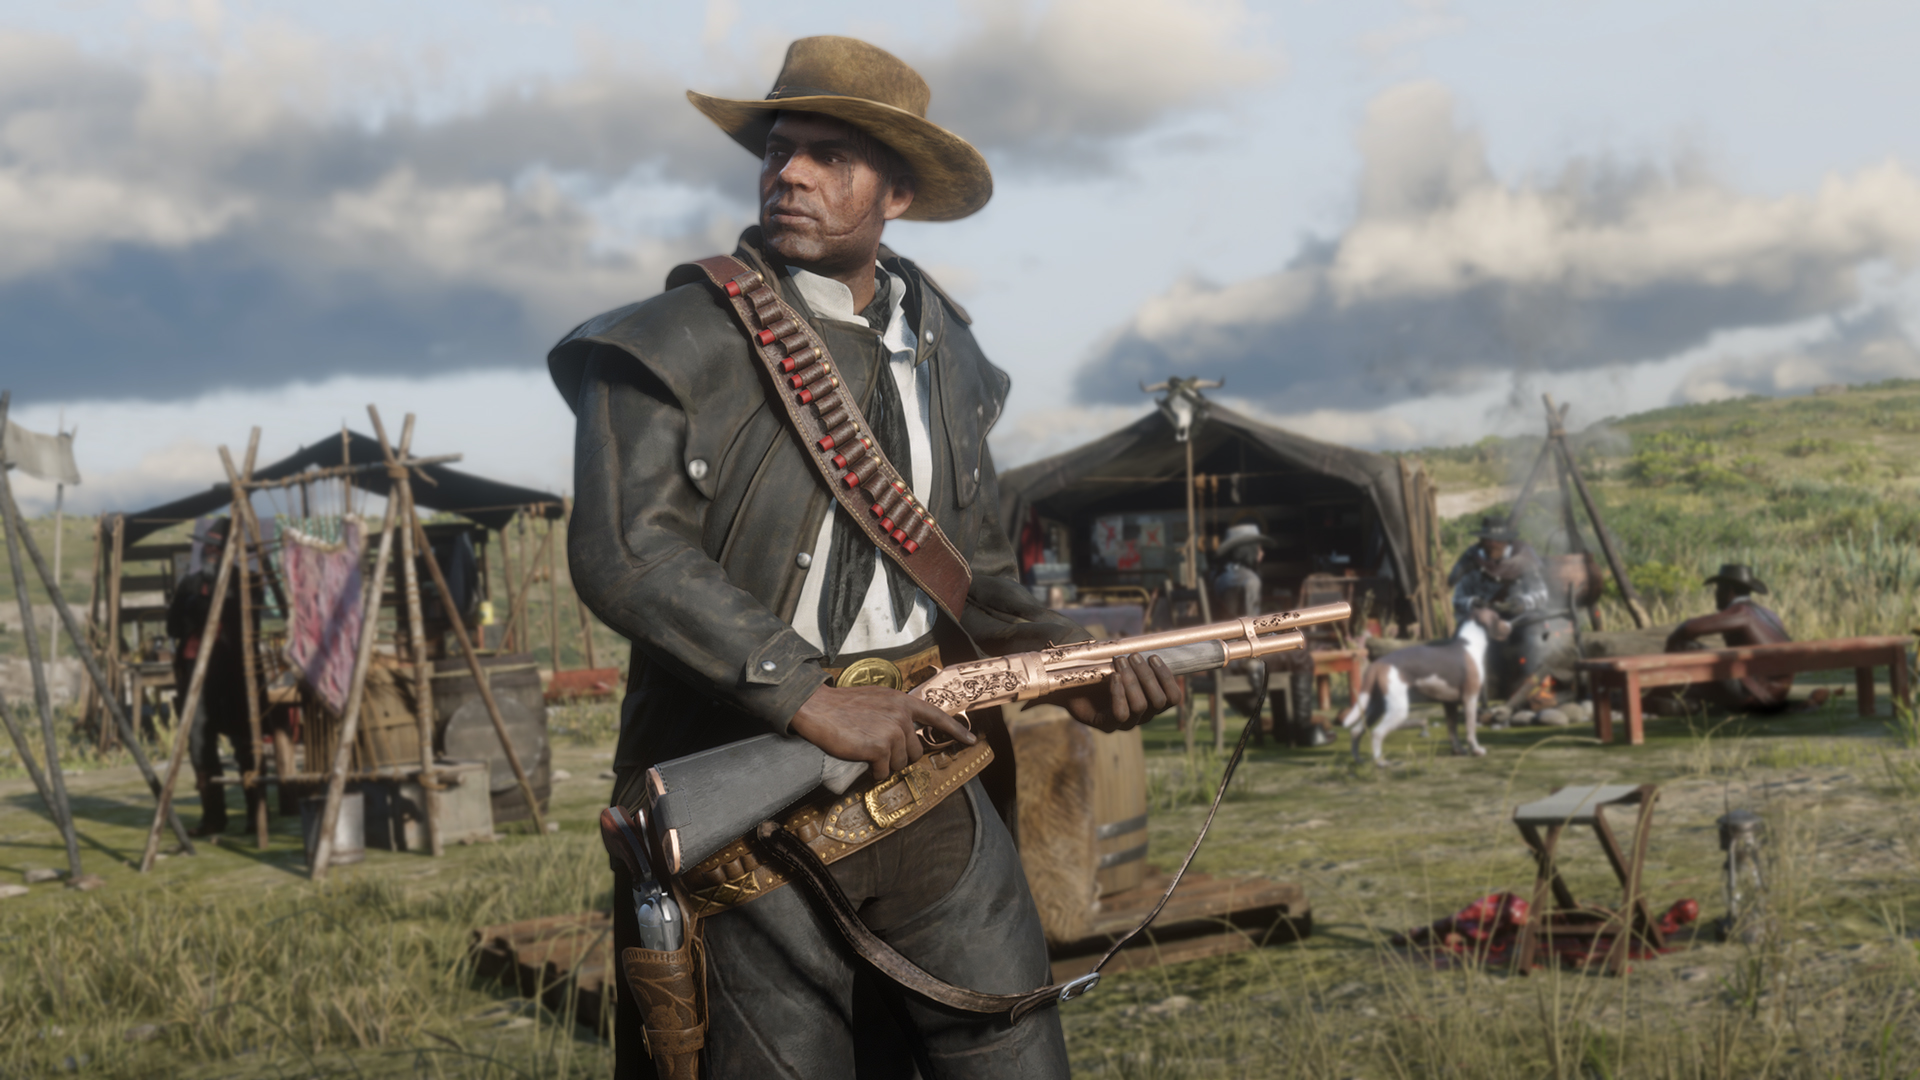 red dead redemption pc release date